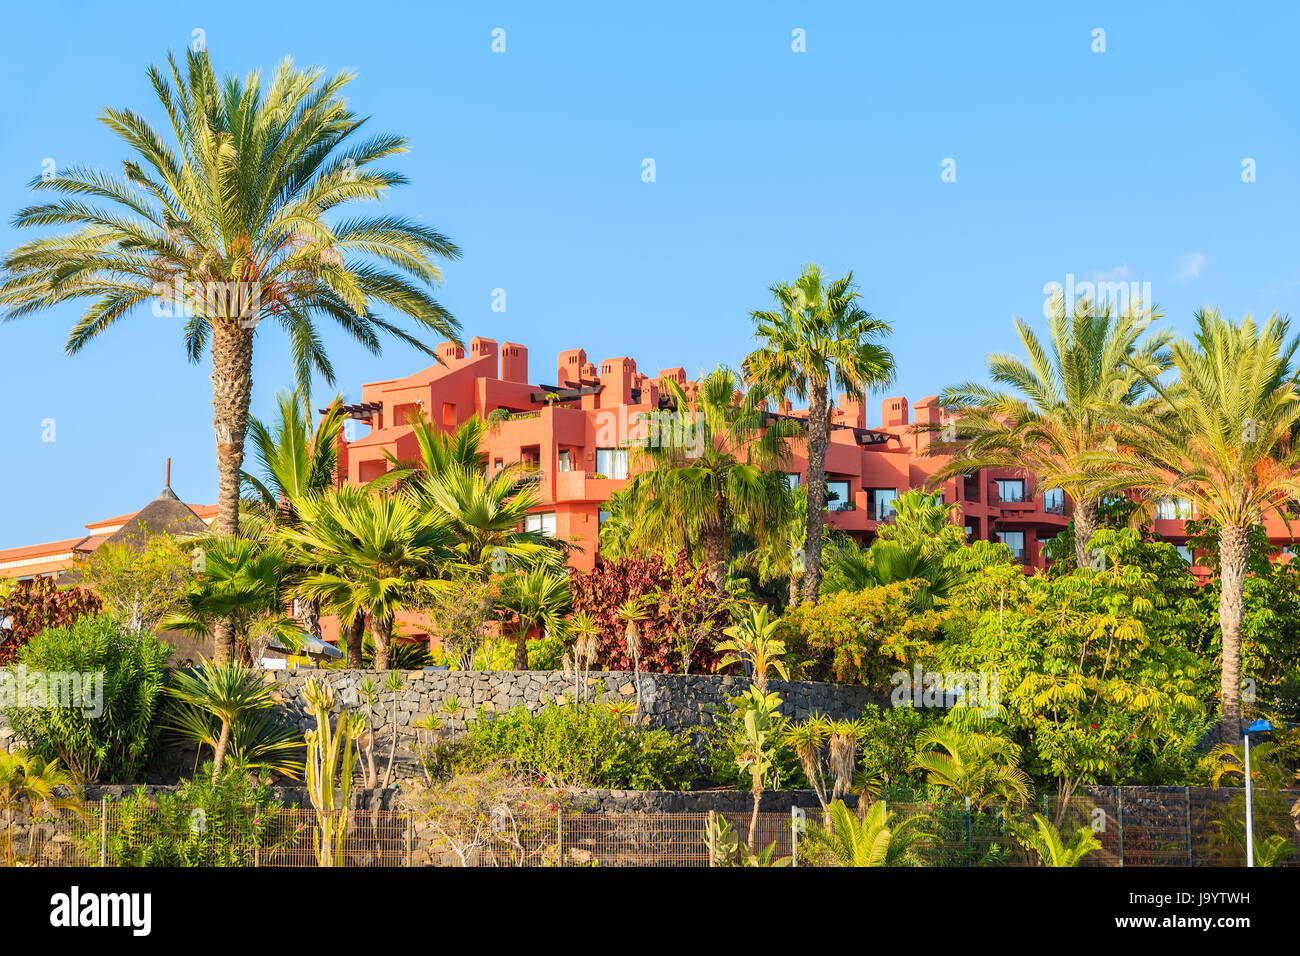 Palm trees and hotel building on coast of Tenerife island in Costa Adeje seaside town, Canary Islands, Spain Stock Photo